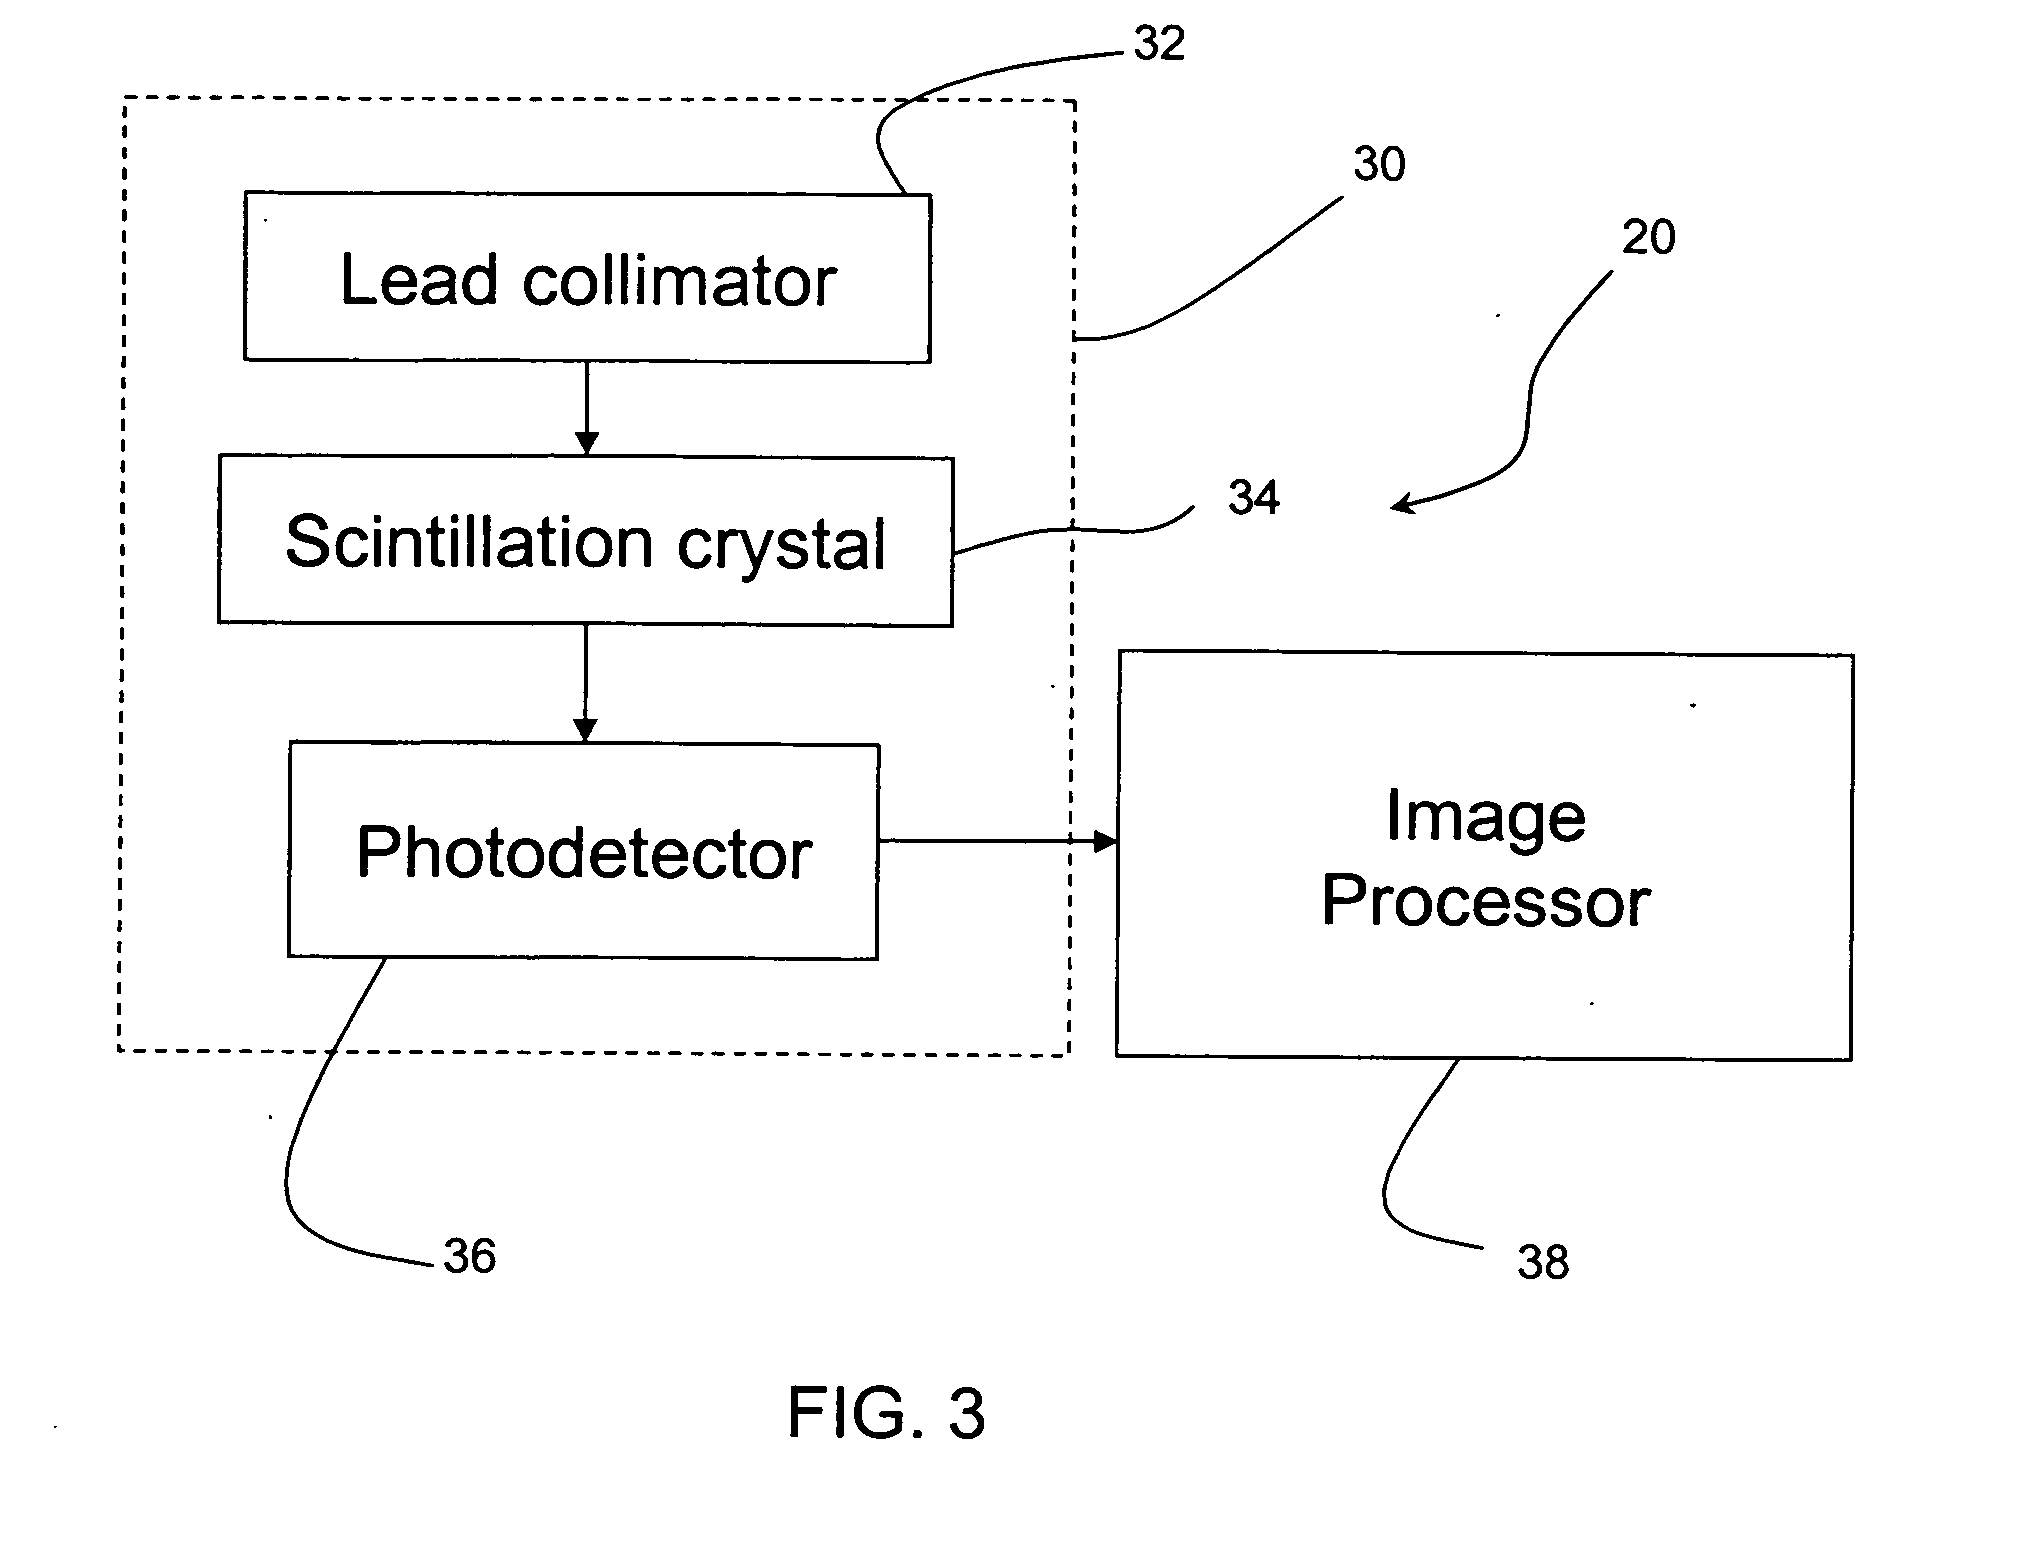 Method and system of adaptive exposure for a camera